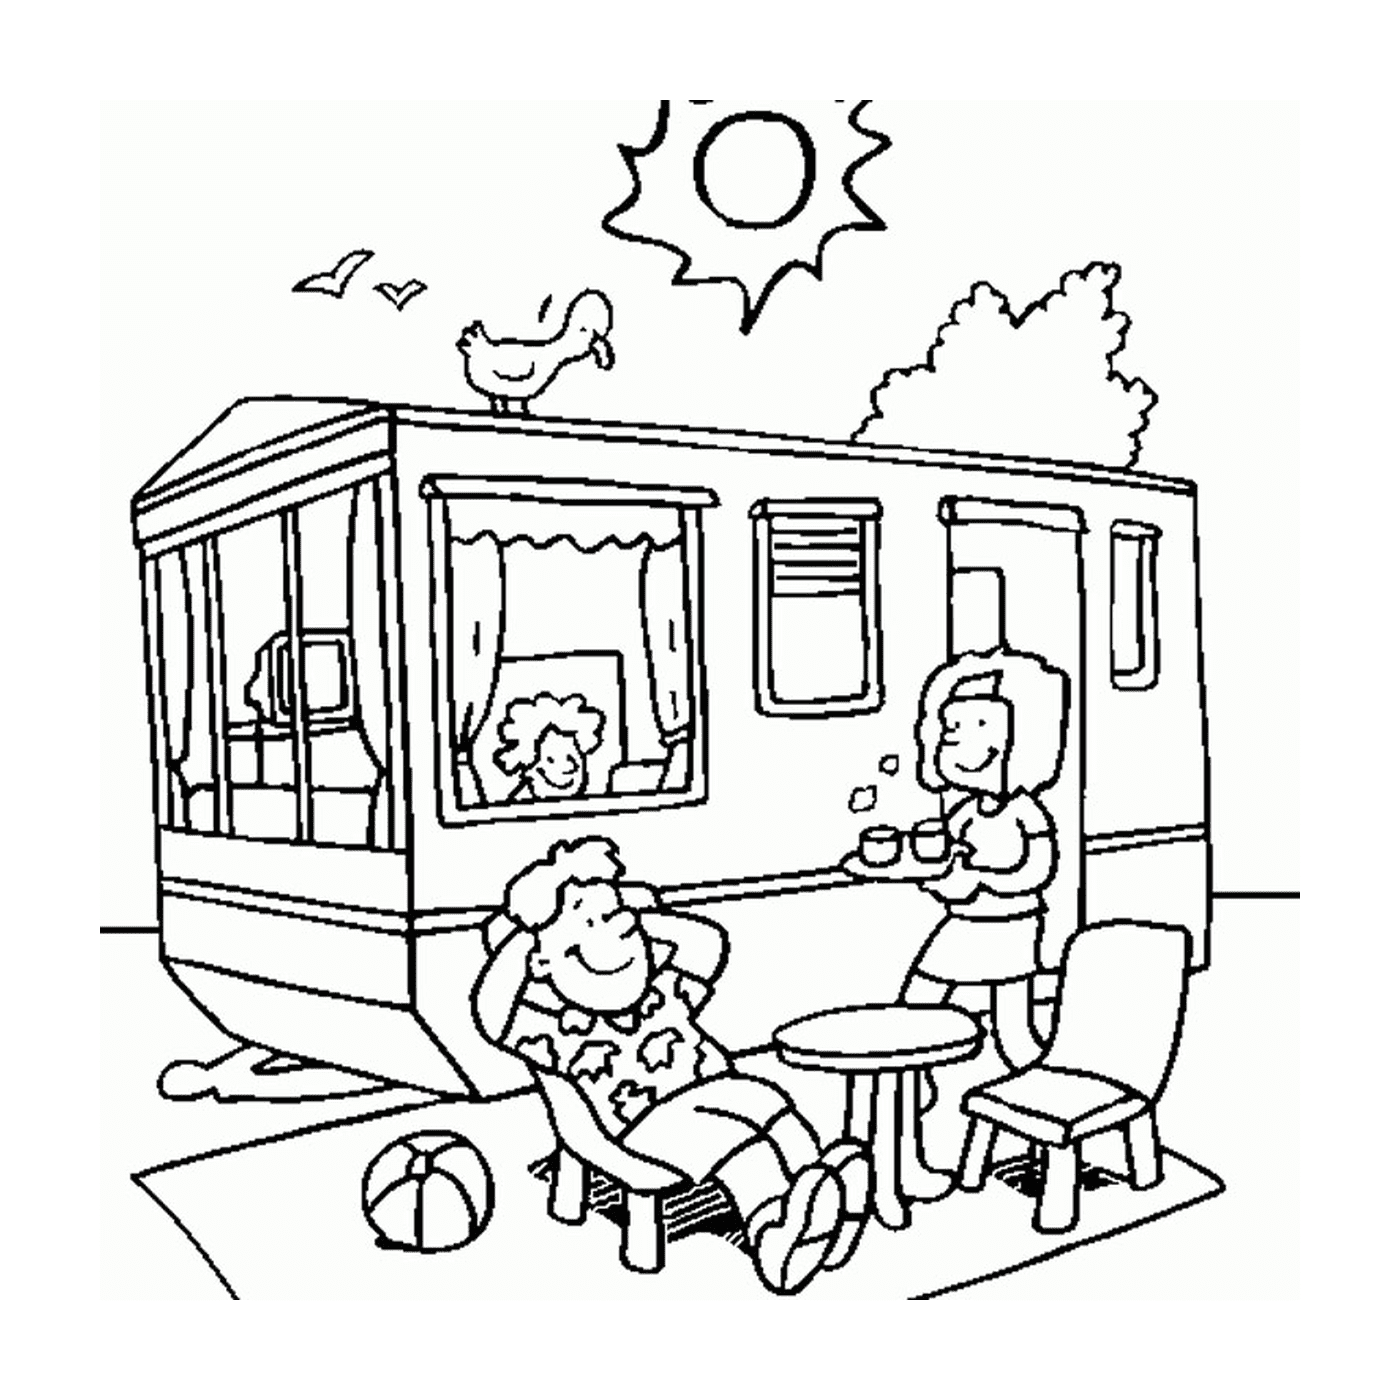  People sitting in front of a motorhome on summer holidays 